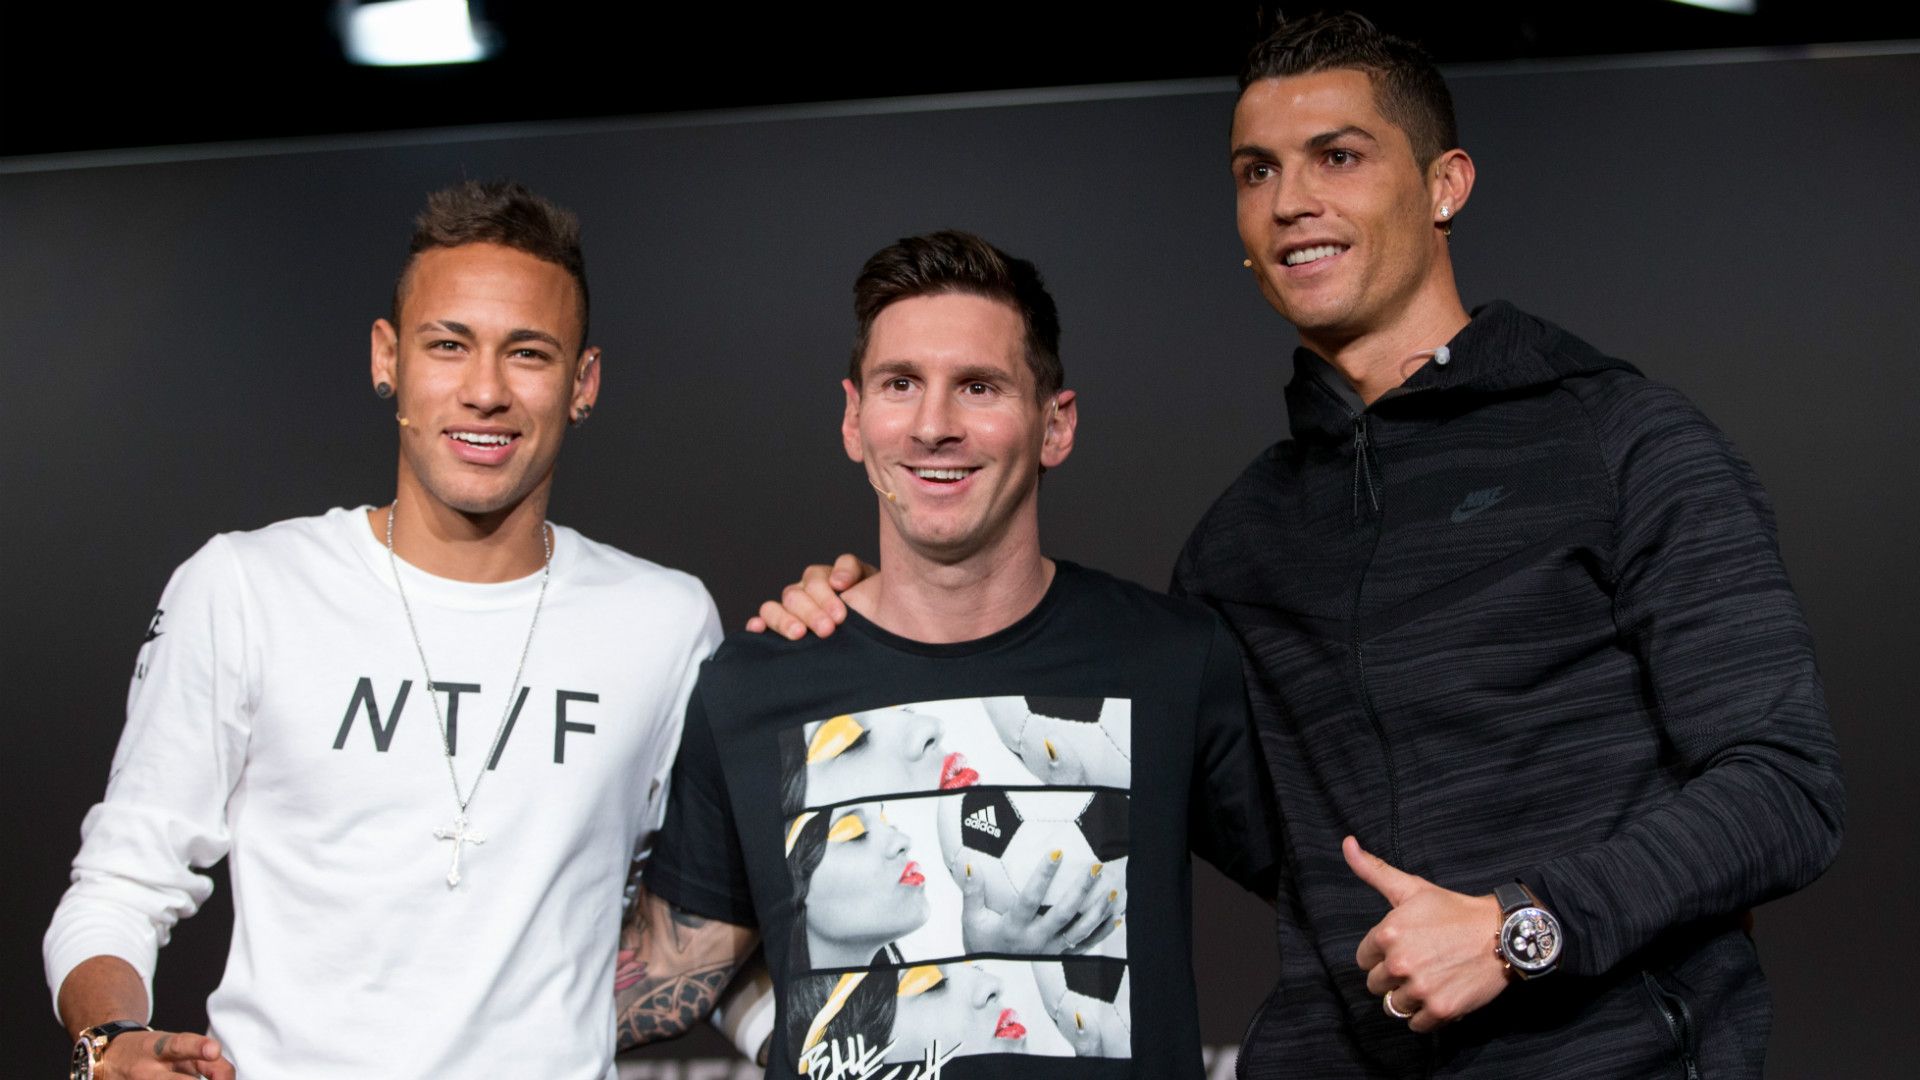 Neymar inspired by 'monster' Cristiano Ronaldo and 'idol' Lionel